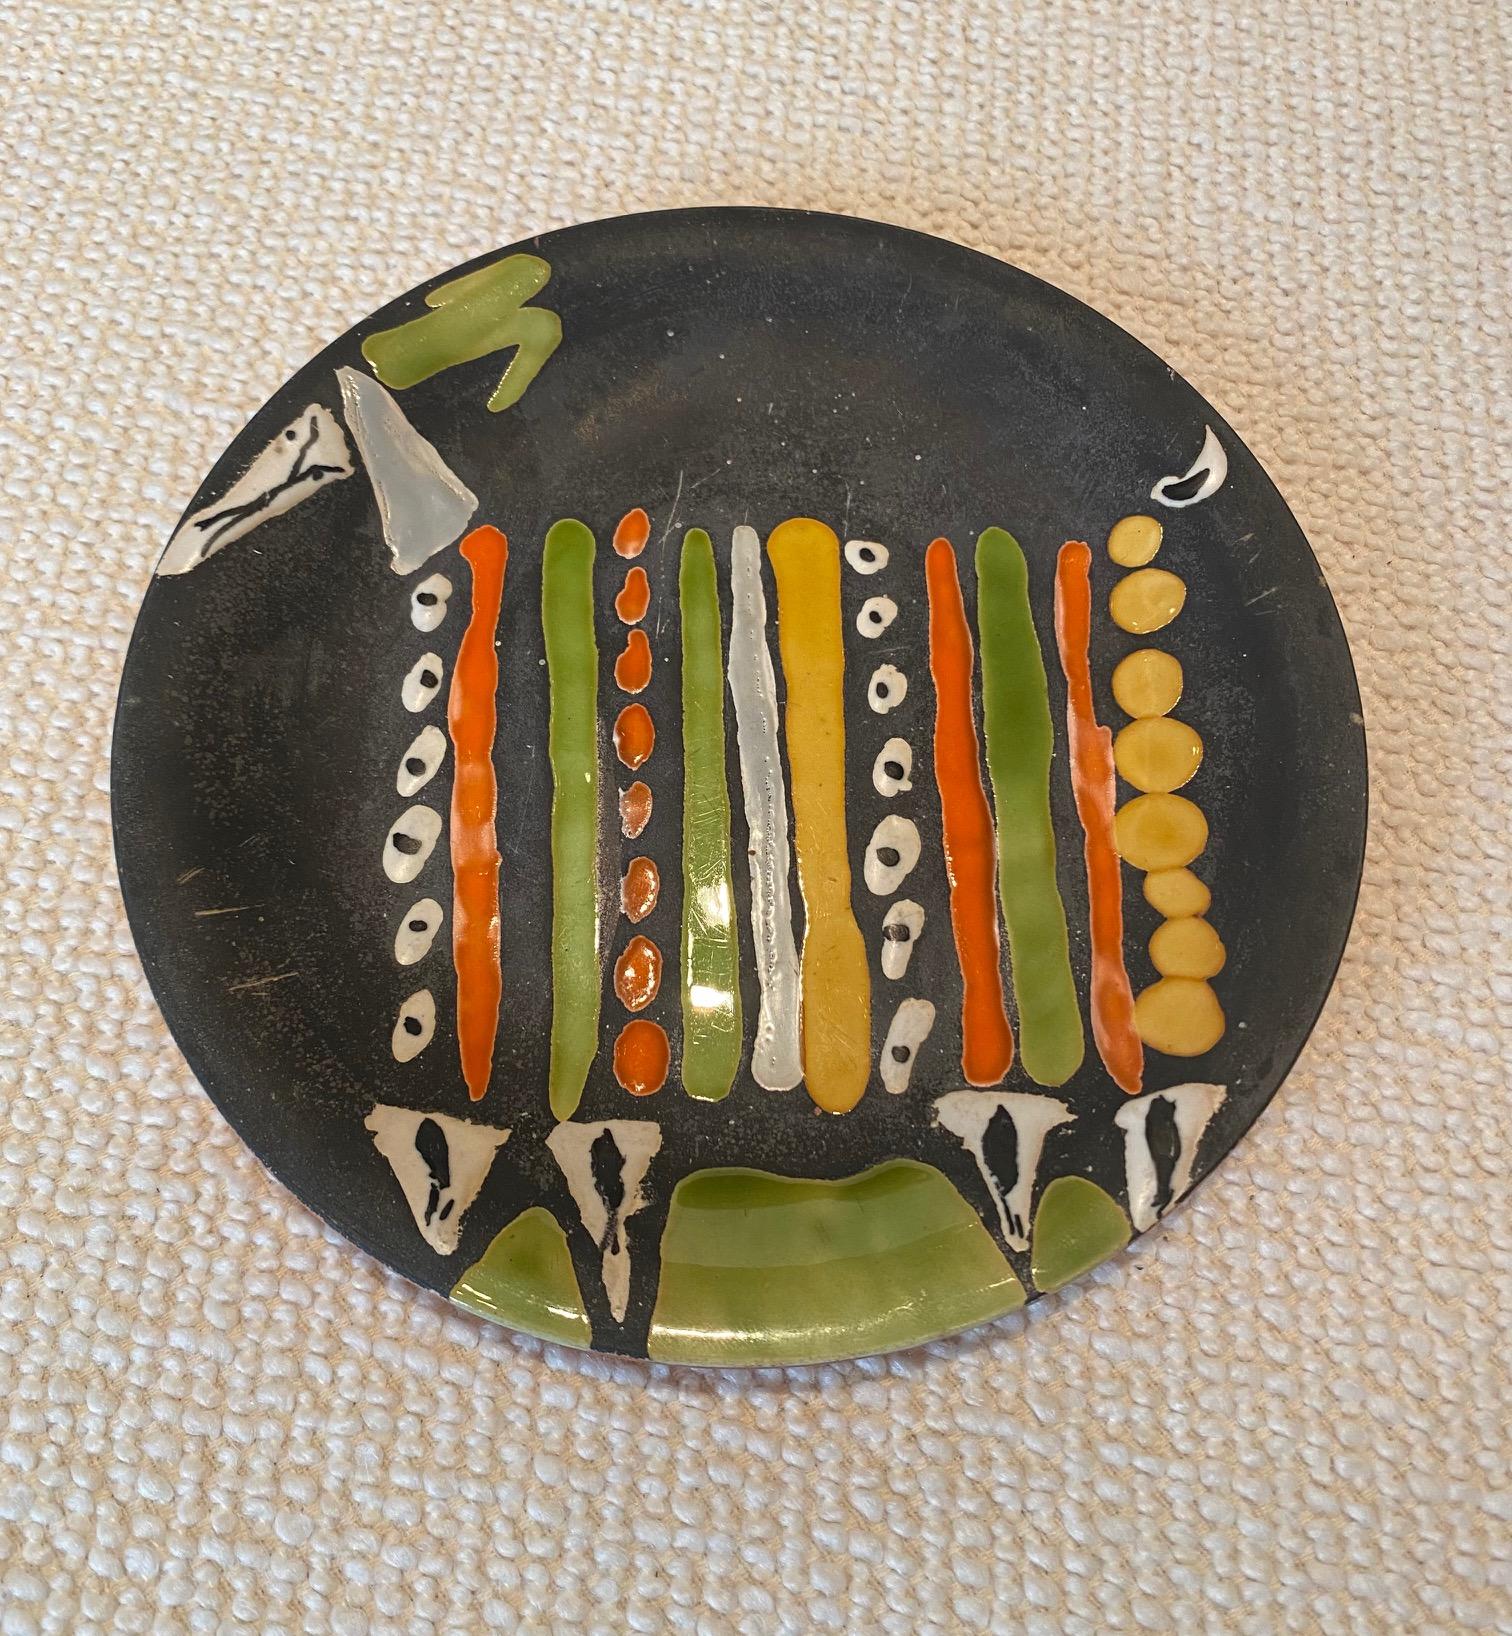 Ceramic Plate by Roger Capron, Vallauris, France, 1960s.